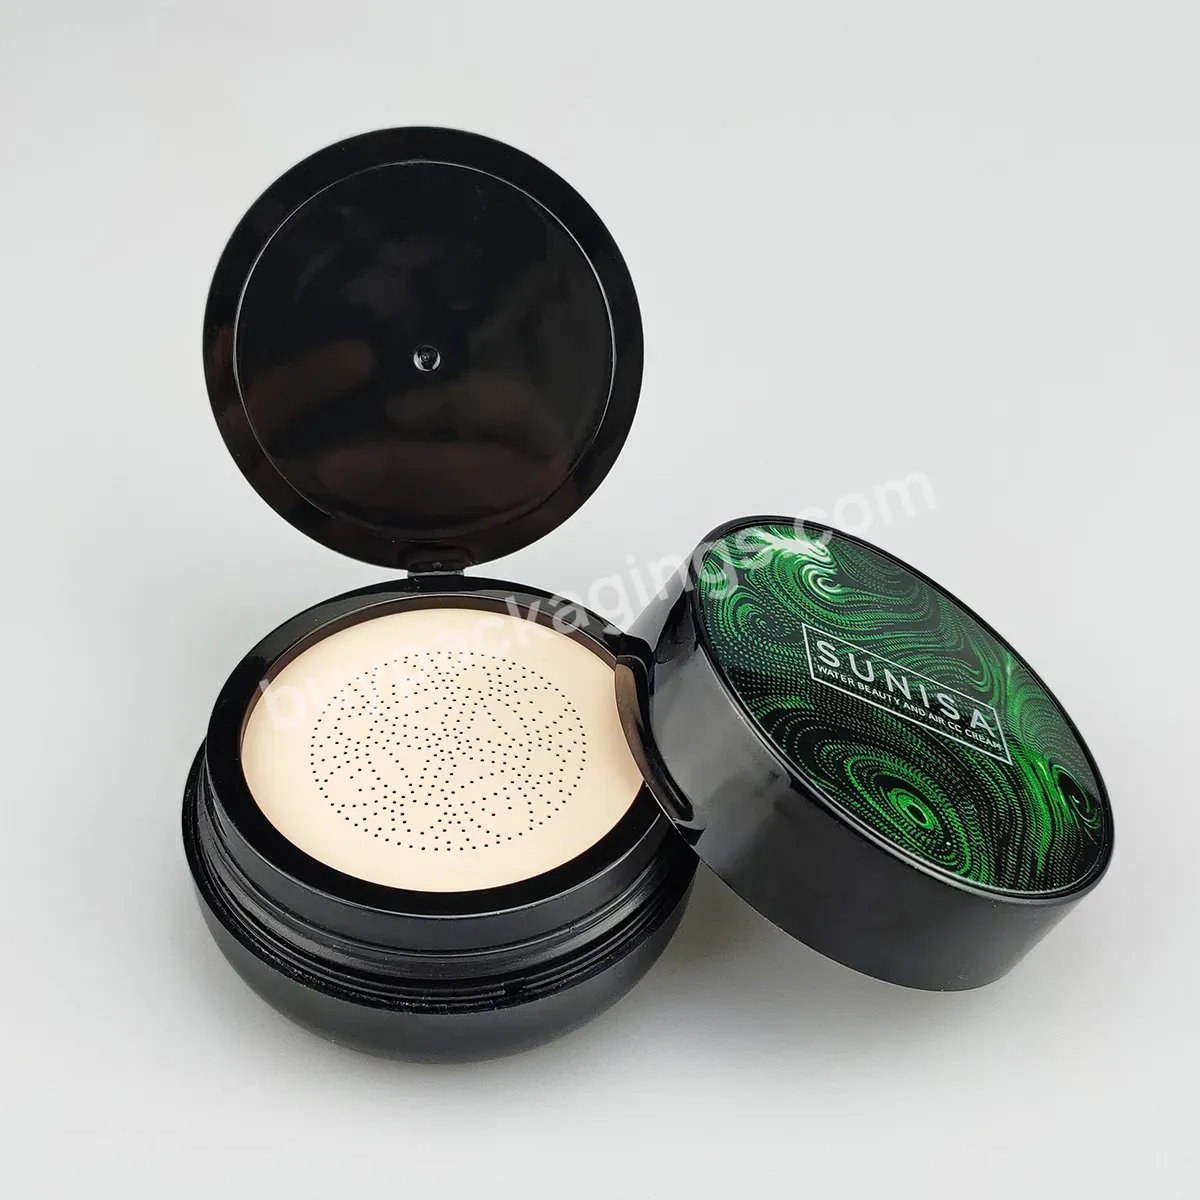 Cosmetic Bb Air Cushion Foundation Case,Makeup Empty Compact Powder Case Packaging - Buy 15g Empty Portable Air Cushion Puff Container Box Bb Cc Liquid Foundation Cream Powder Compact Case With Mirror,Stock Wholesale Empty Bb Cushion Foundation Cases